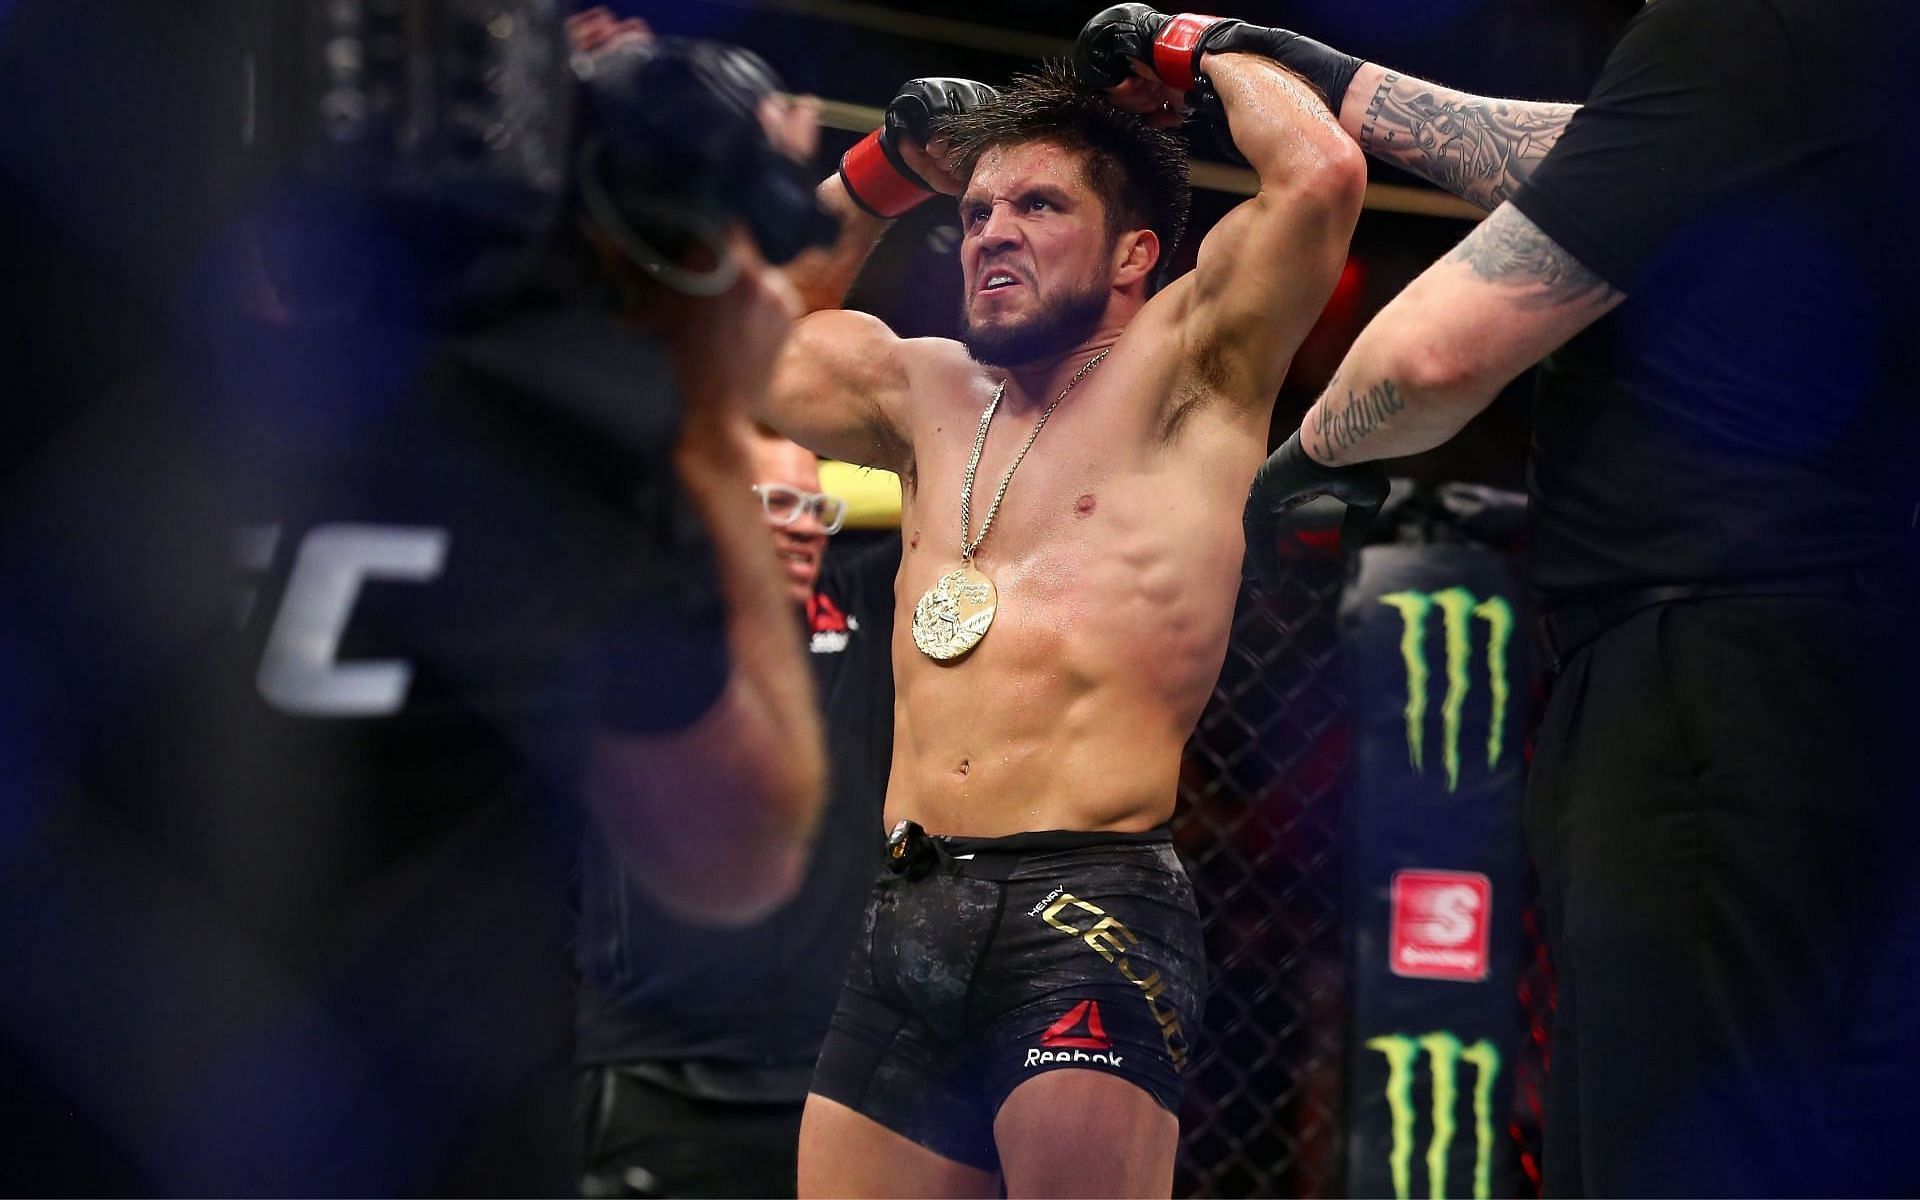 Henry Cejudo last competed in May 2020